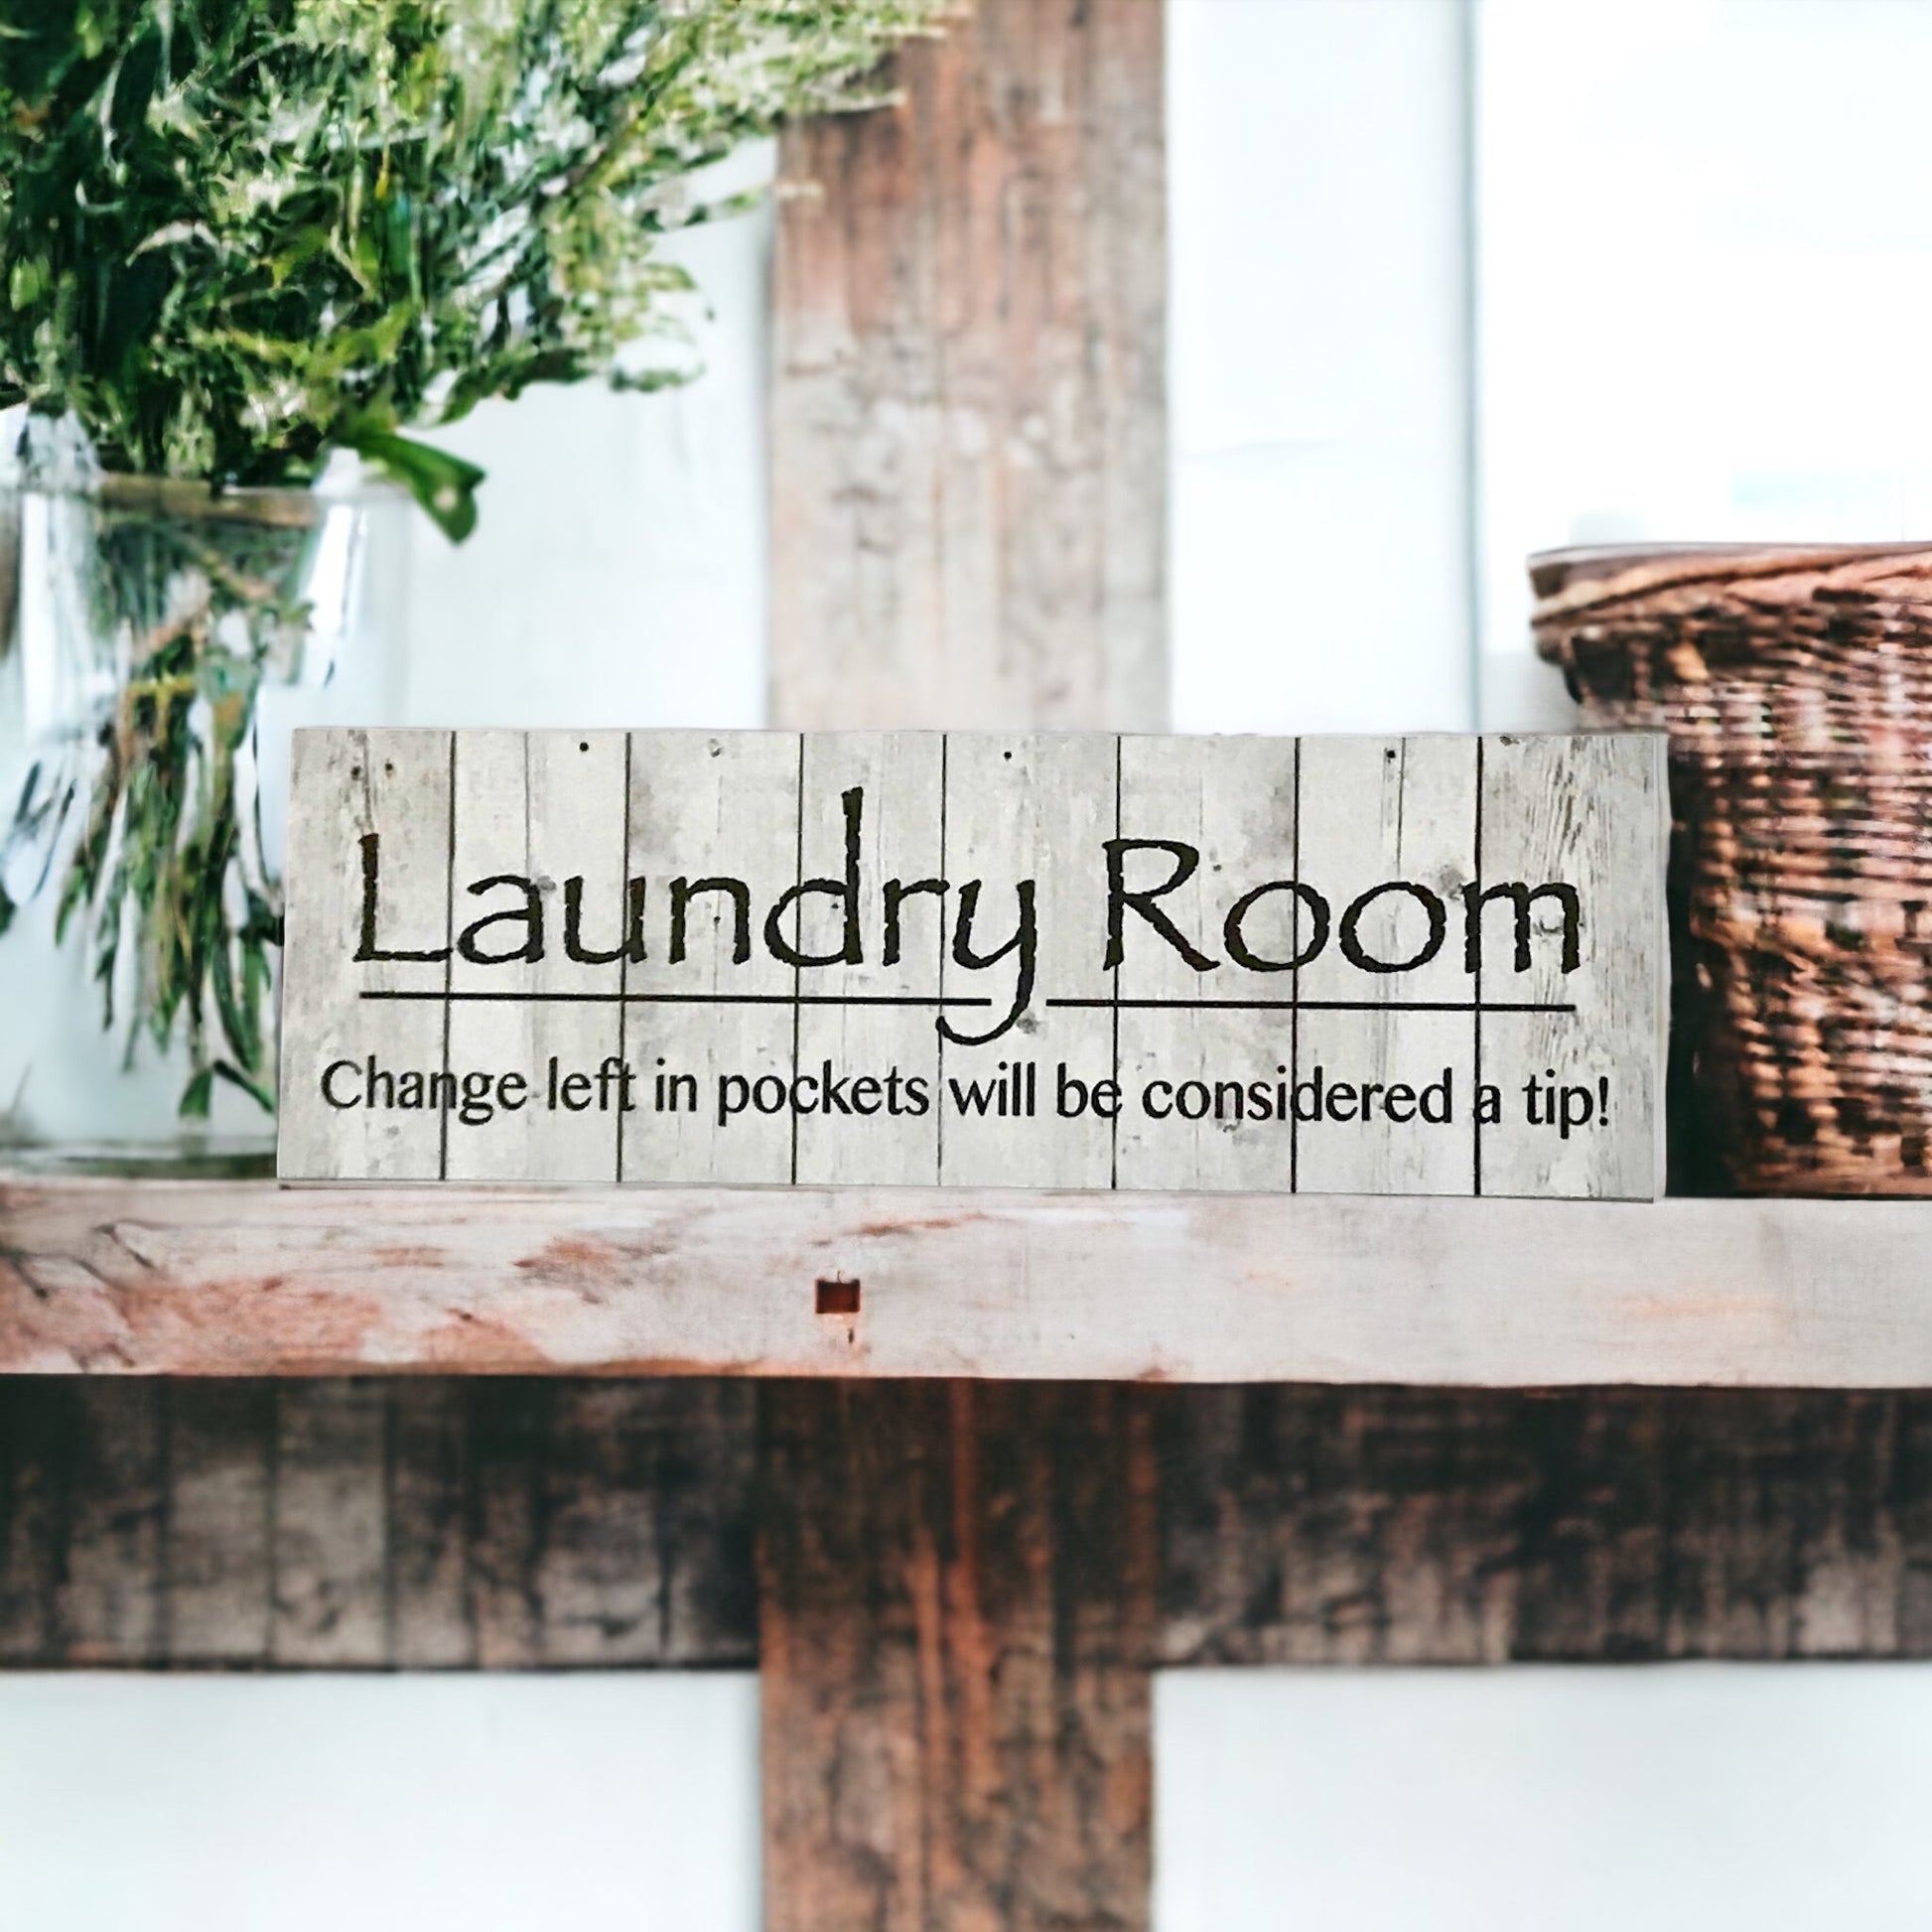 Laundry Room Rustic Change Considered Tip Sign - The Renmy Store Homewares & Gifts 